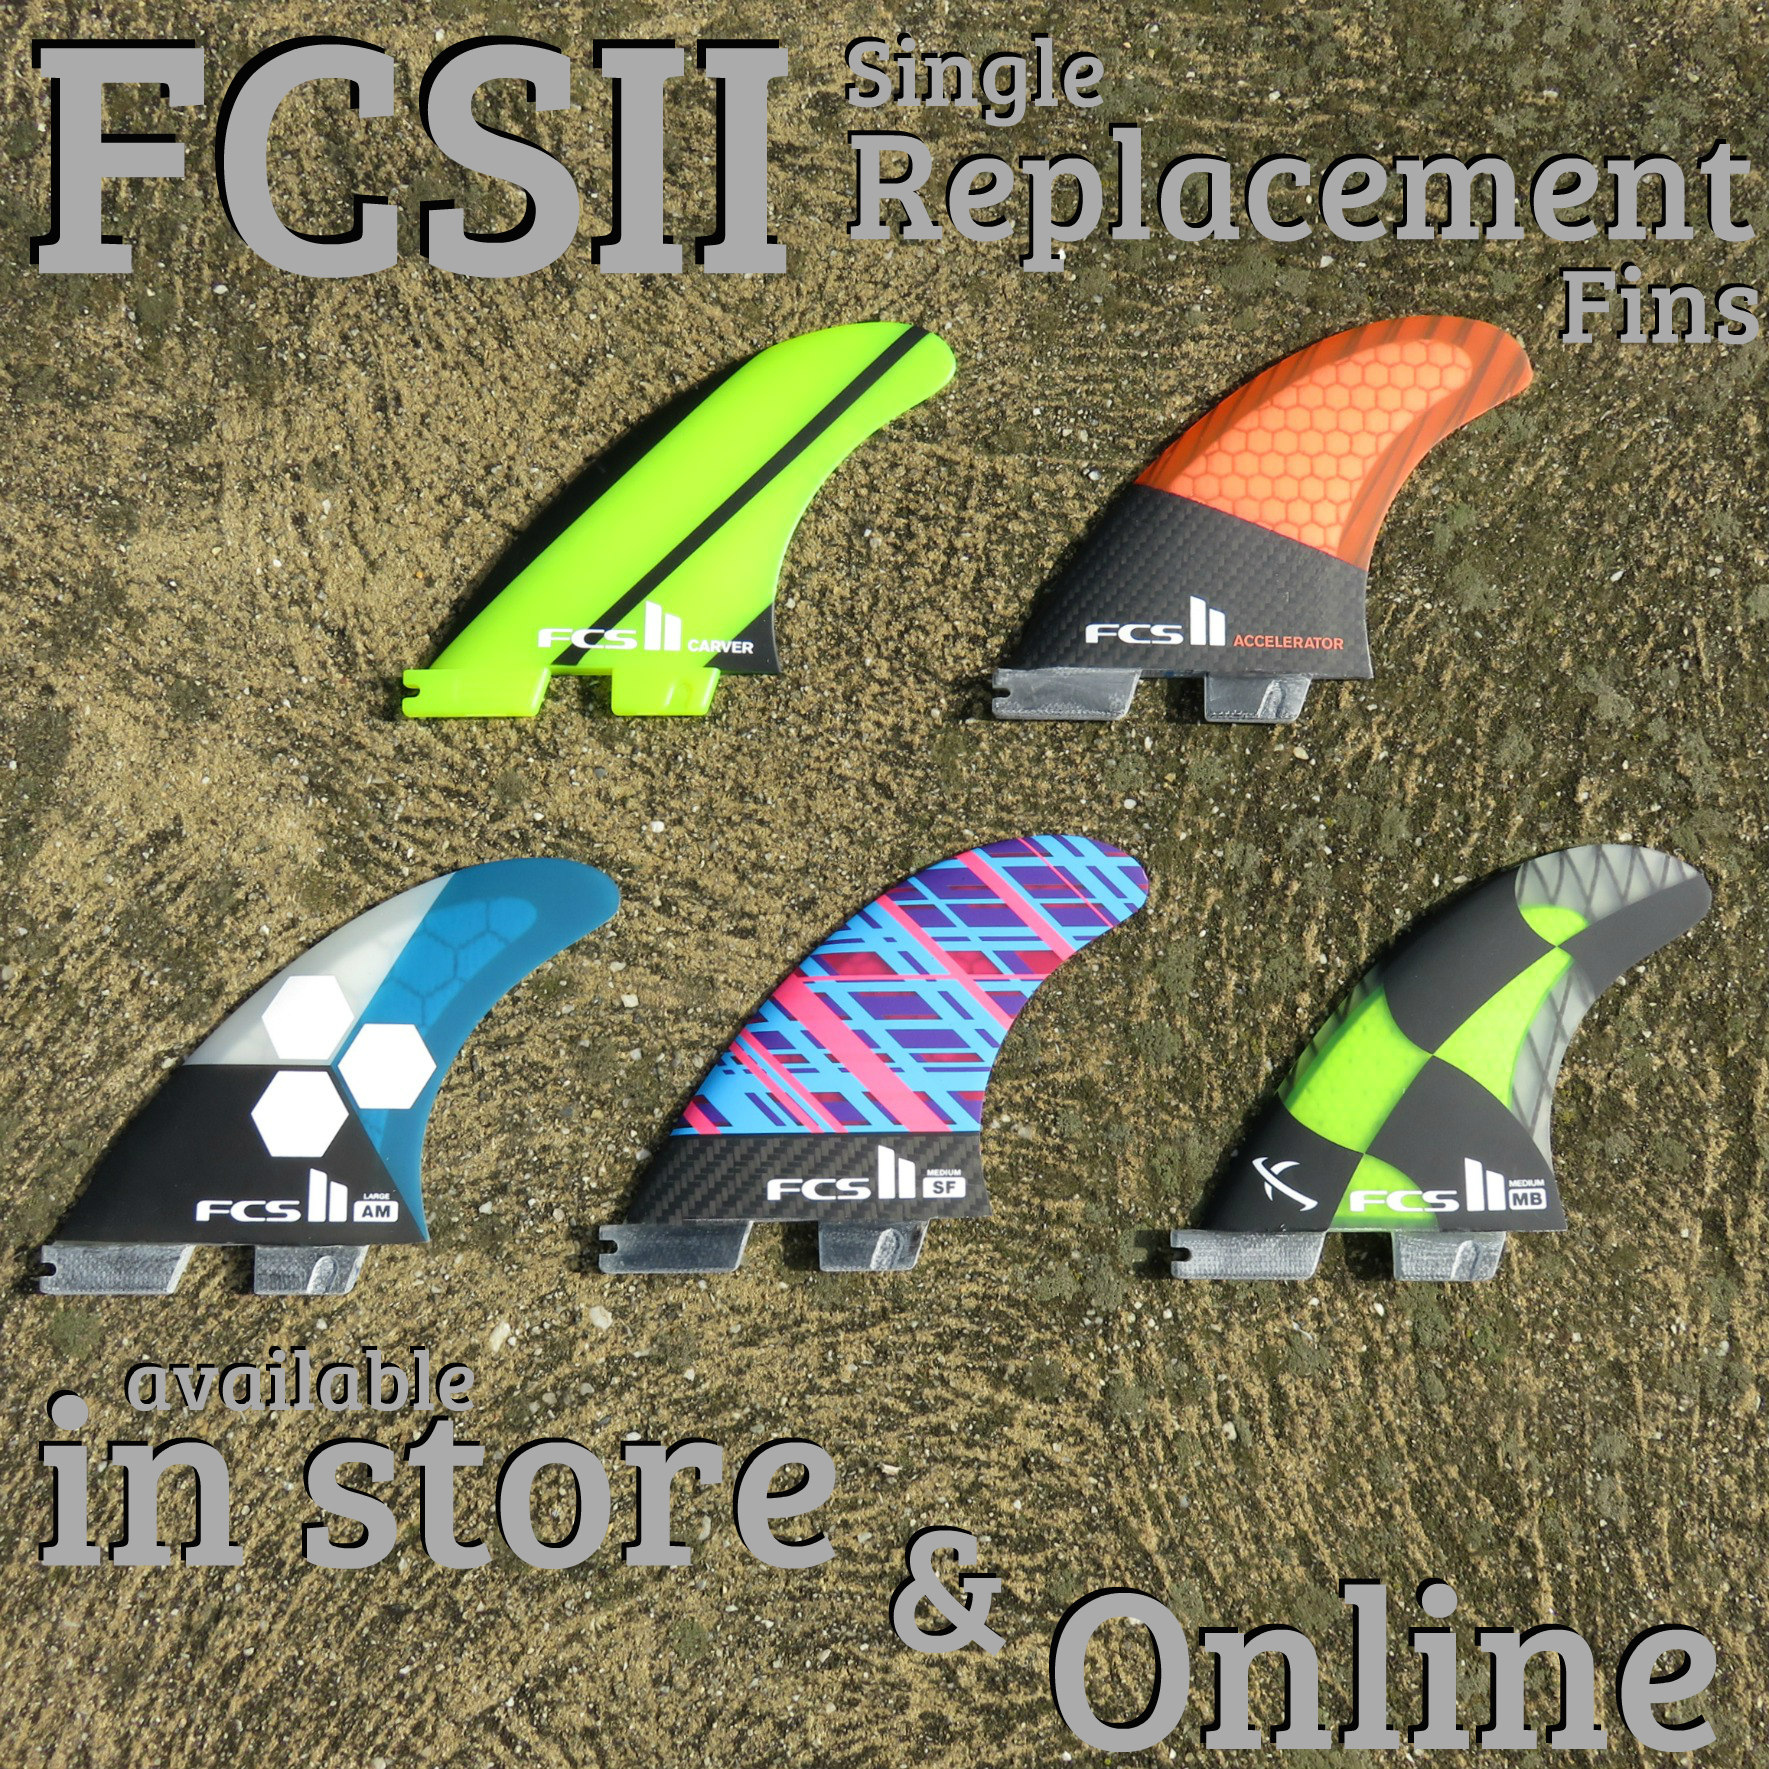 FCSII Single Replacement Fins